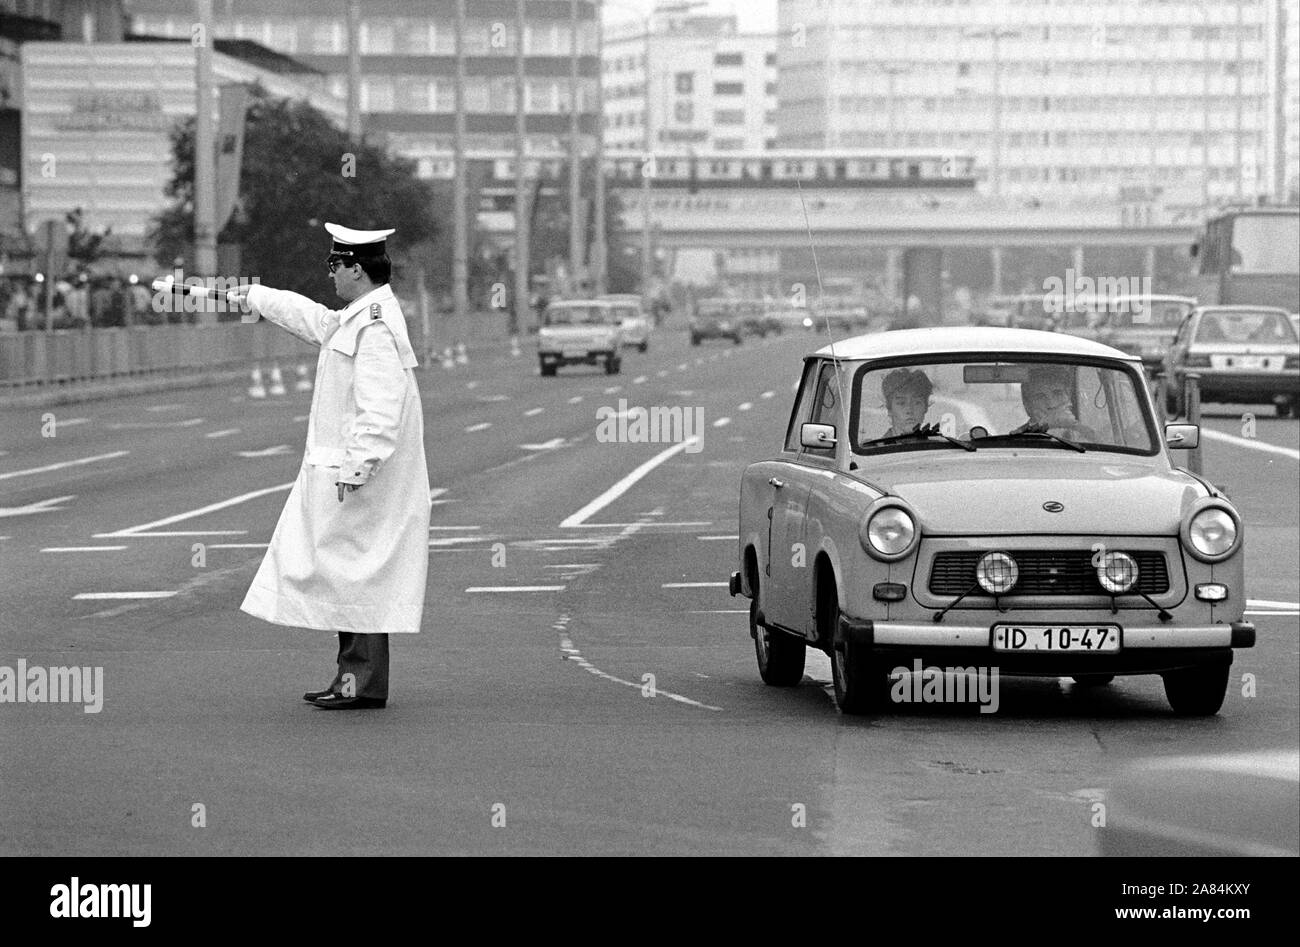 Germany, East Berlin, October 1989 - scenes of everyday life in the East German capital - formerly the GDR - a few days later the Berlin Wall falled - Stock Photo